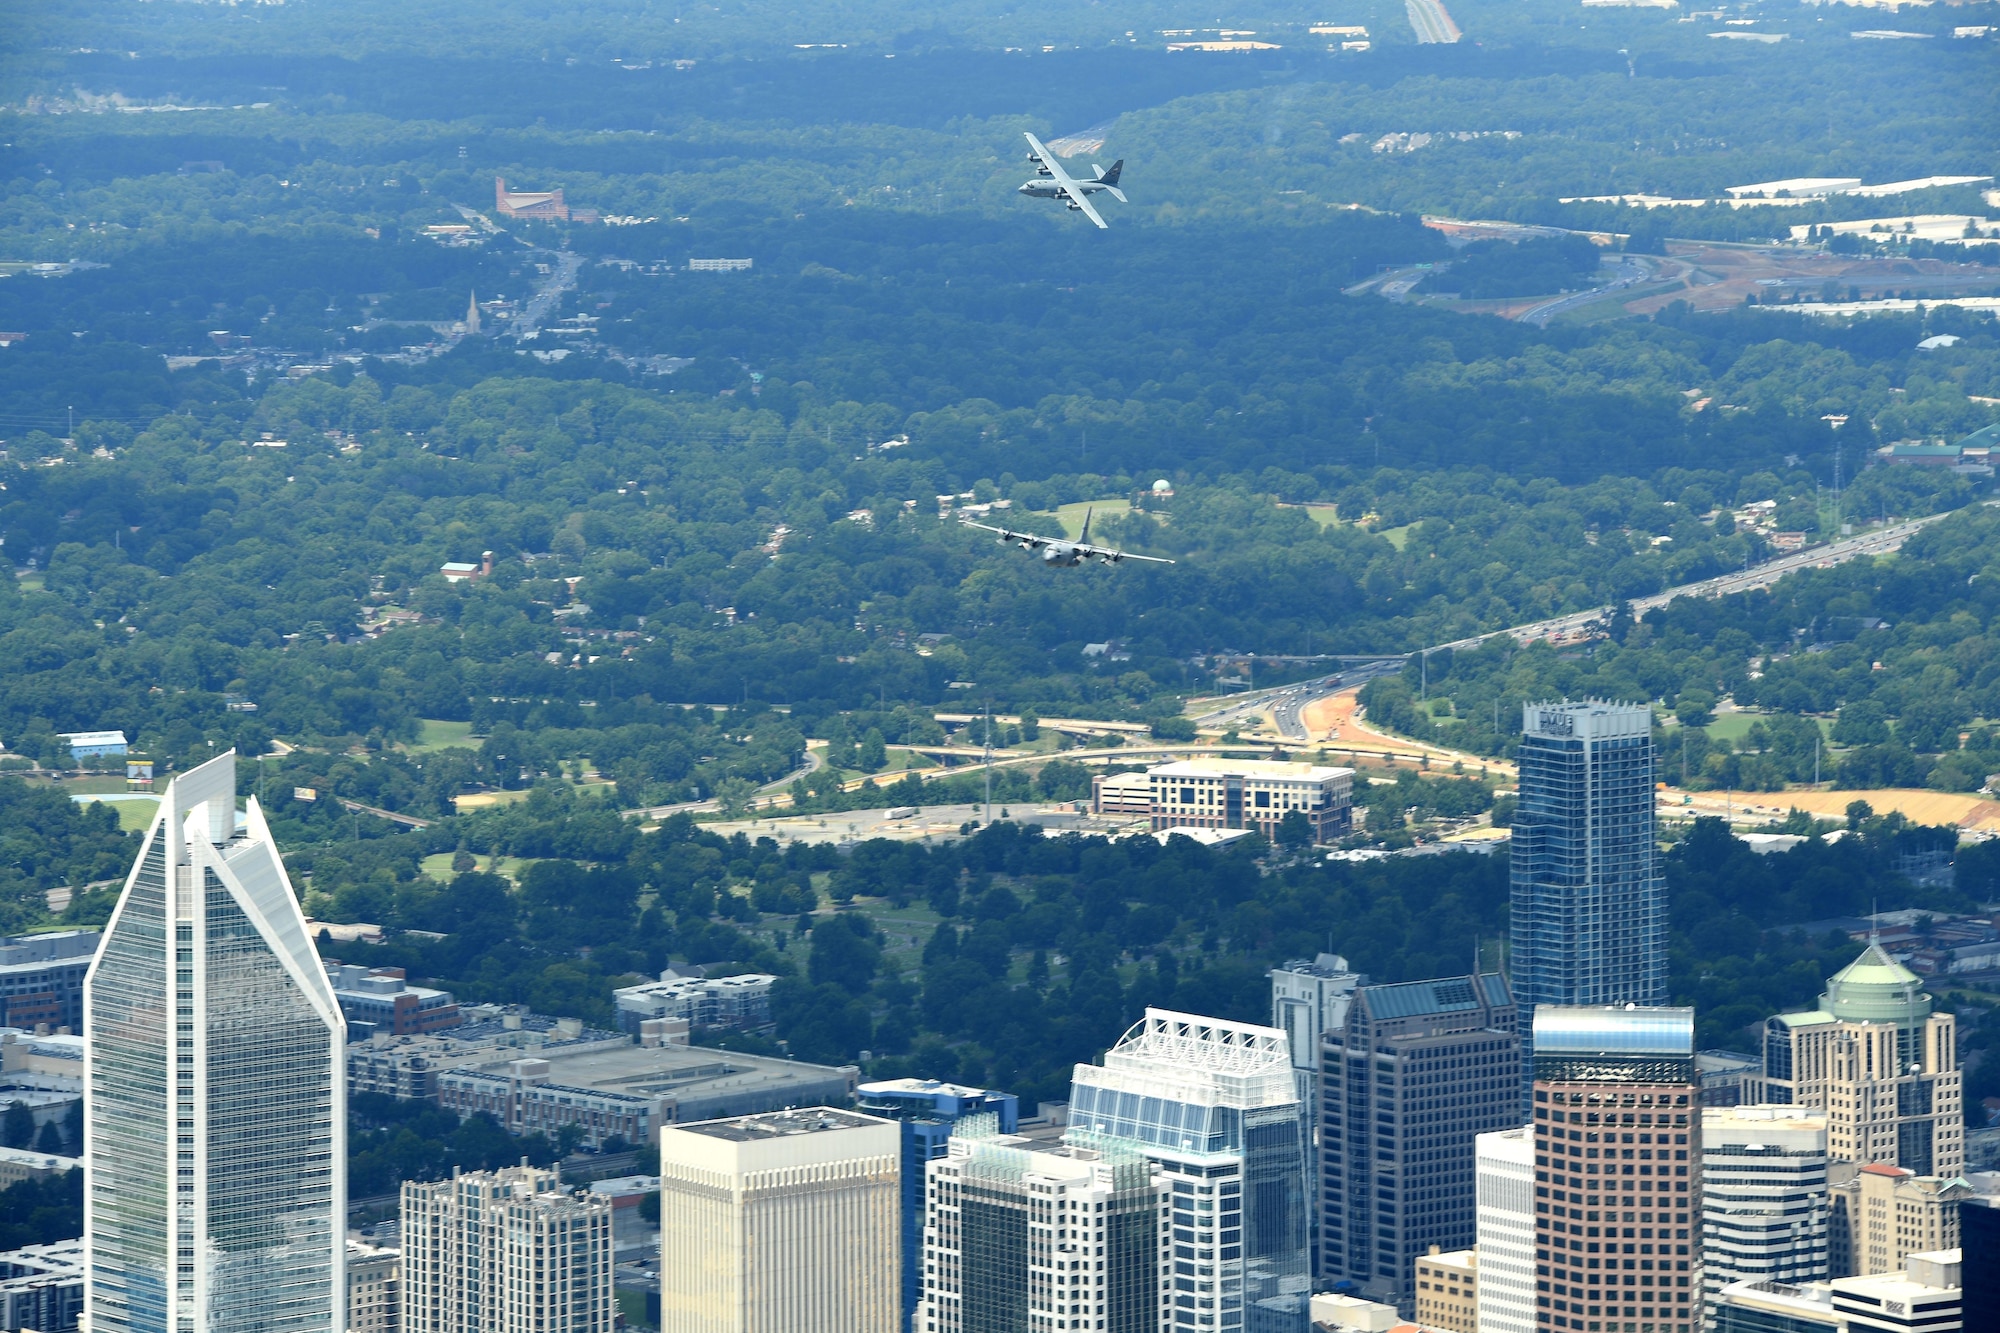 C-130 Aircraft fly above the city of Charlotte